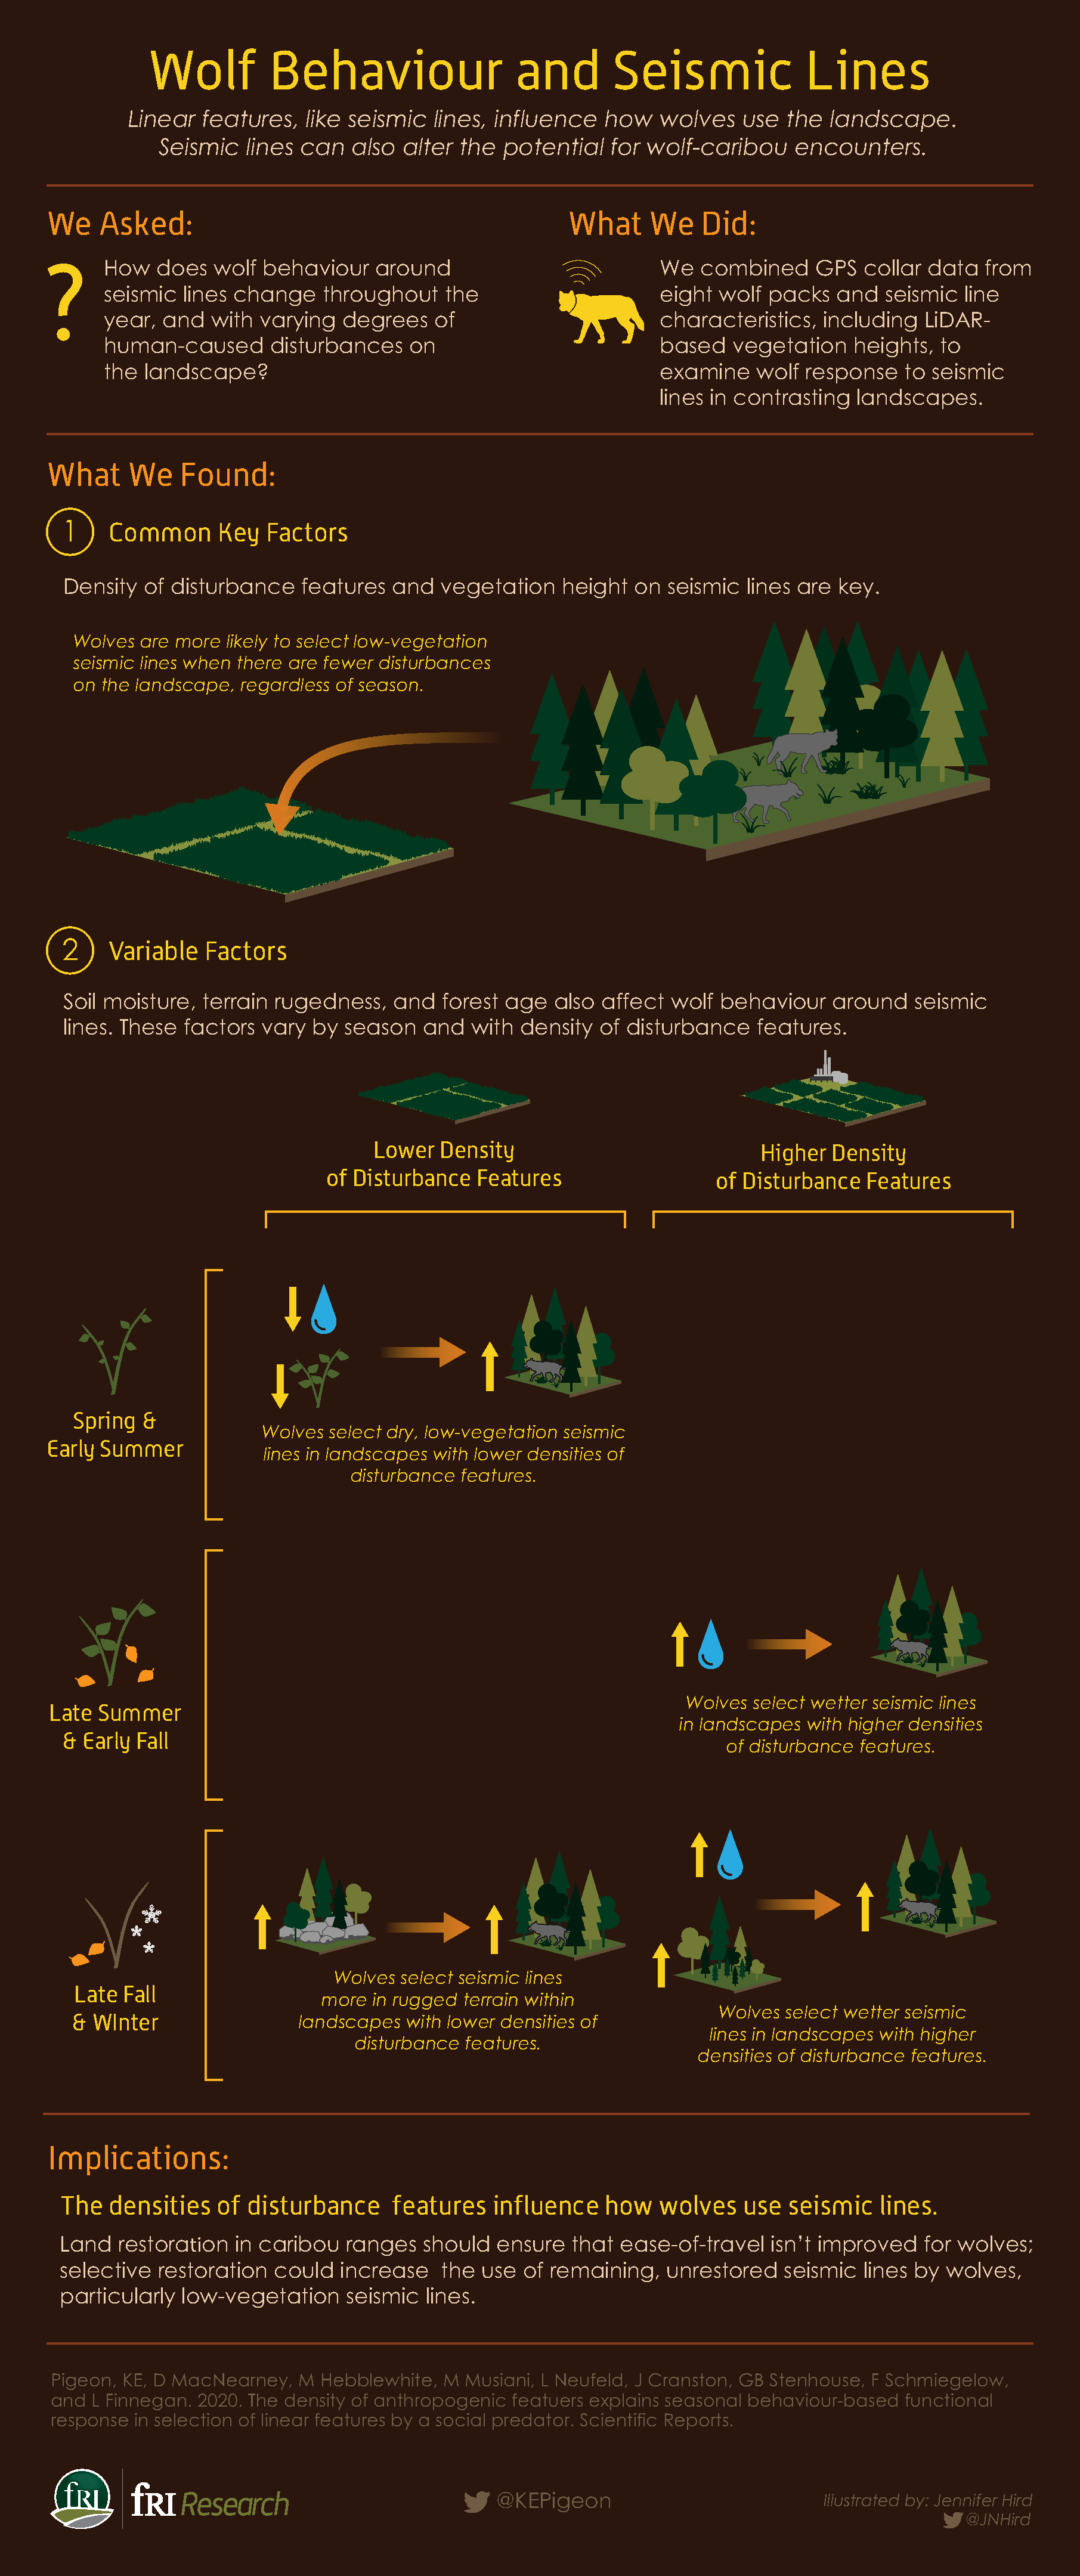 Wolf behaviour and seismic lines infographic